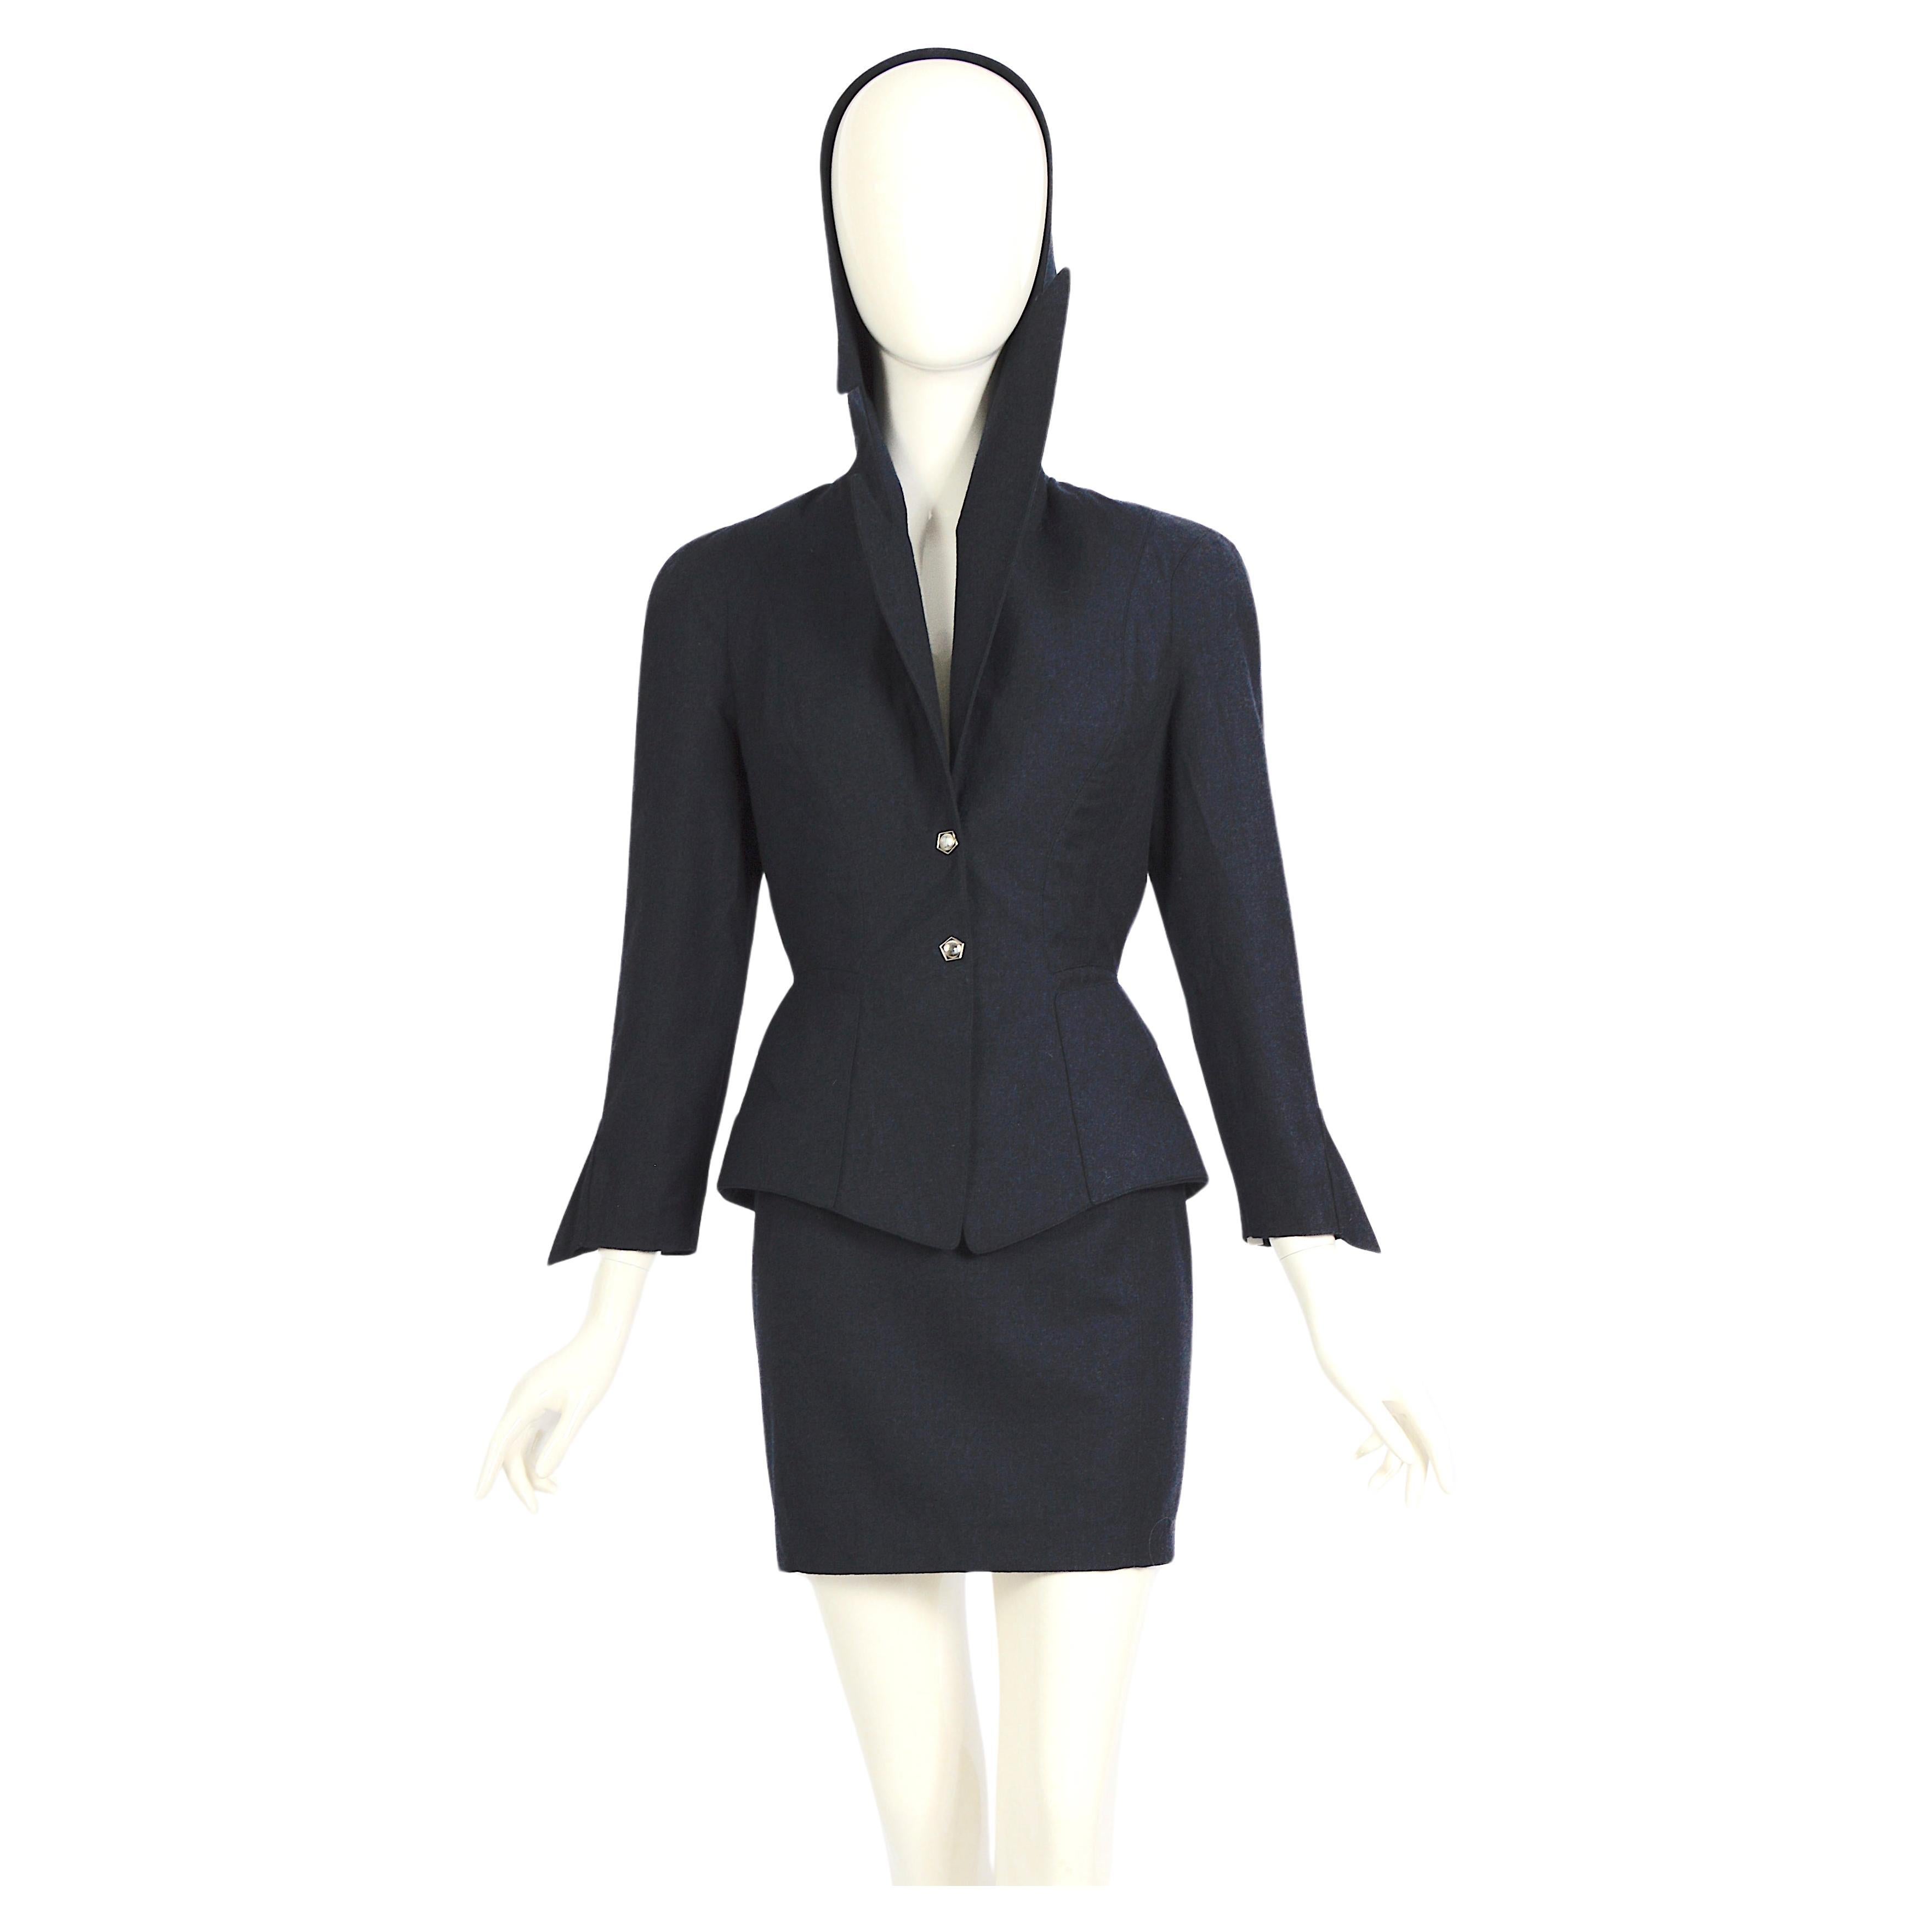 Documented collectable Thierry Mugler FW 1991 shiva collection blue wool hooded jacket & skirt set.
The jacket spotted on Christy Turlington during the show.
Made in dark bleu wool. The wool fabric has no stretch.
In excellent condition.
No size